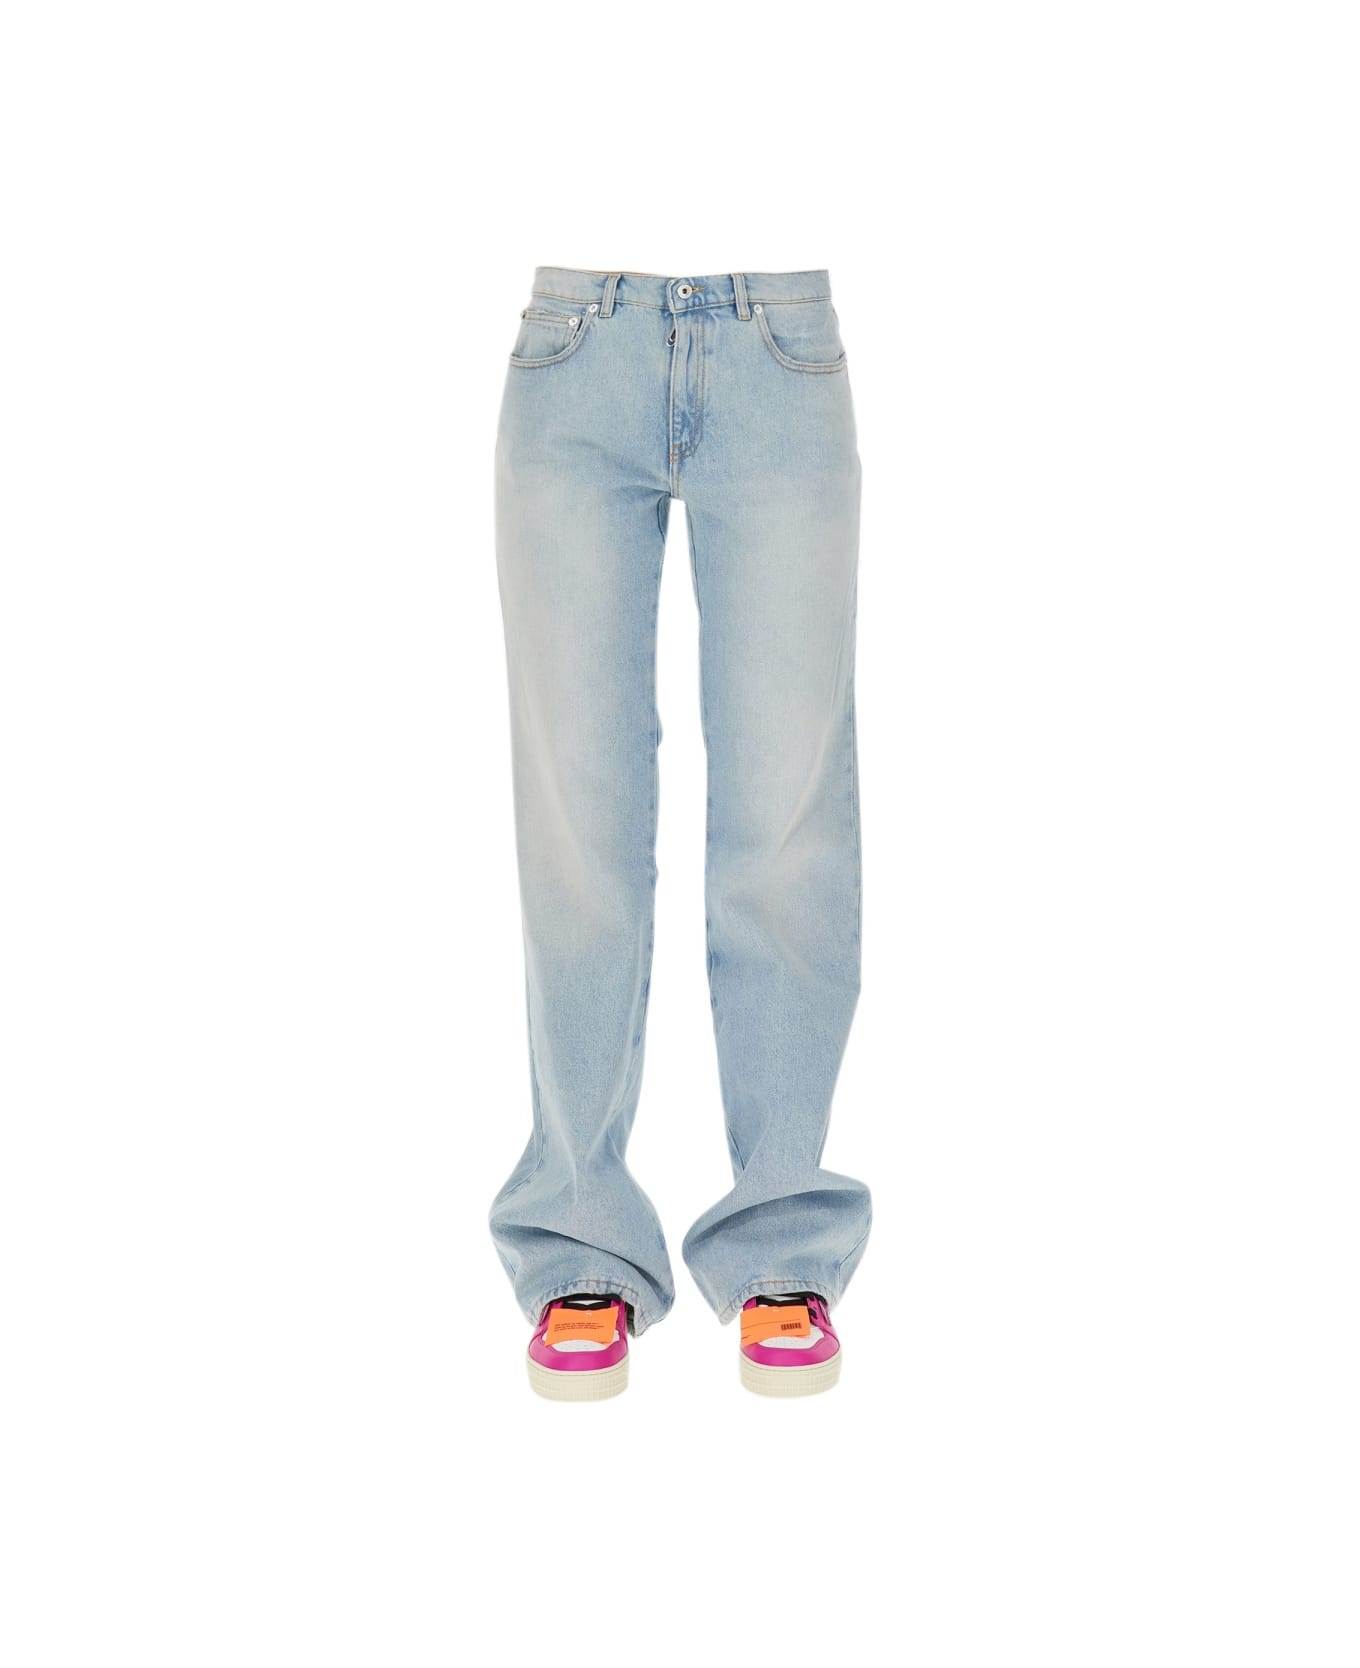 Off-White Beach Baby Baggy Jeans - BLUE デニム